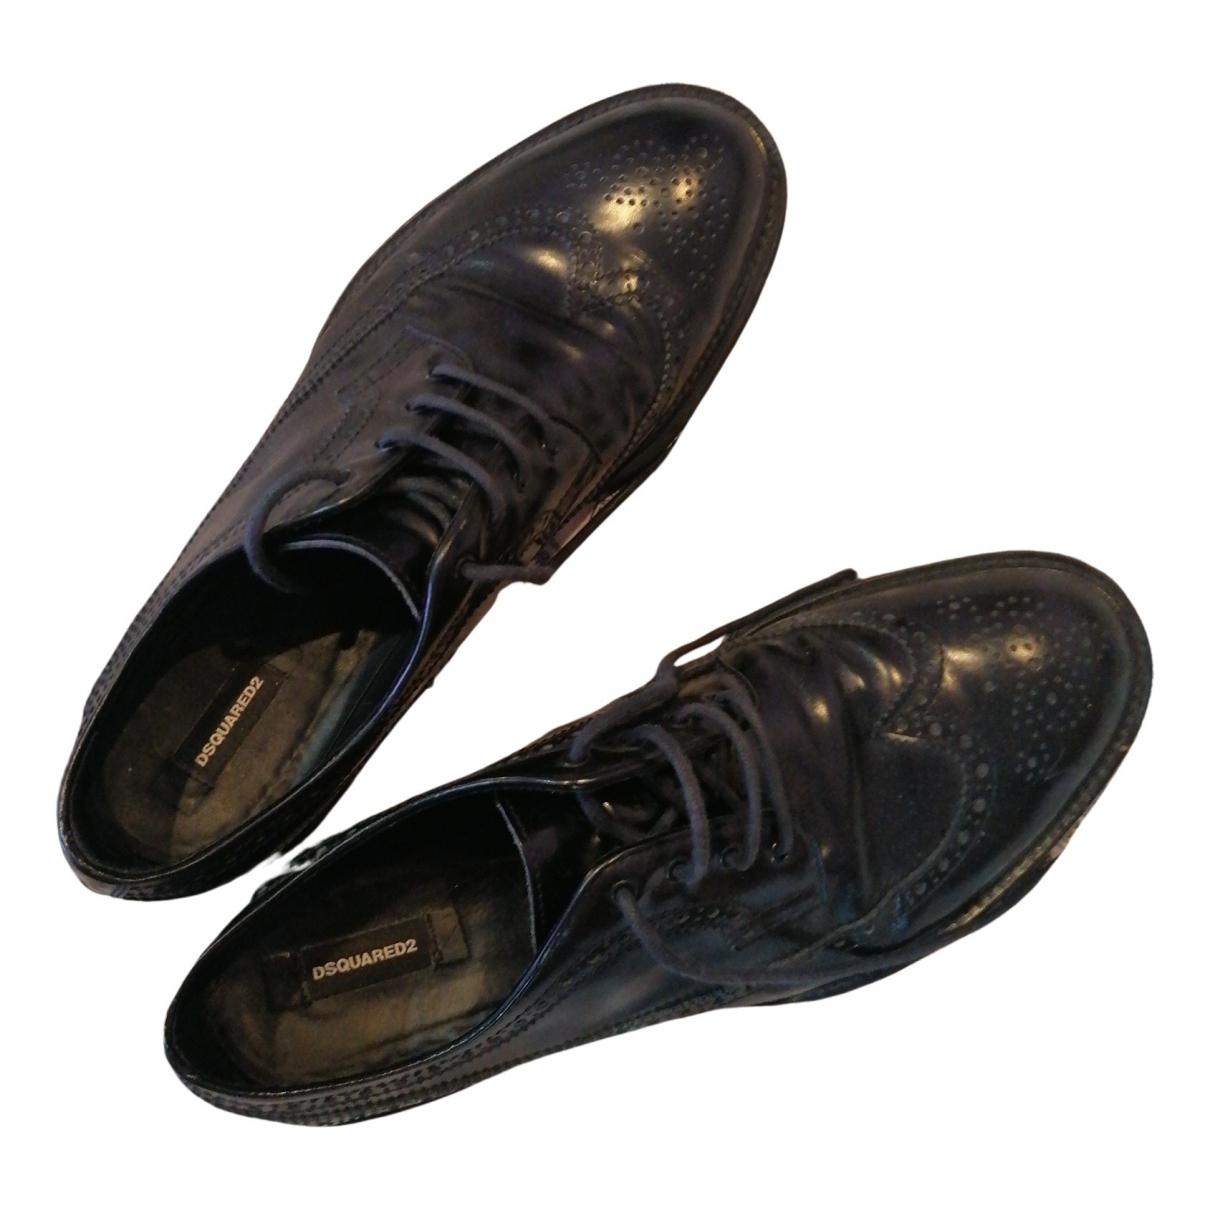 Leather lace ups Margaret Howell Black size 44 EU in Leather 